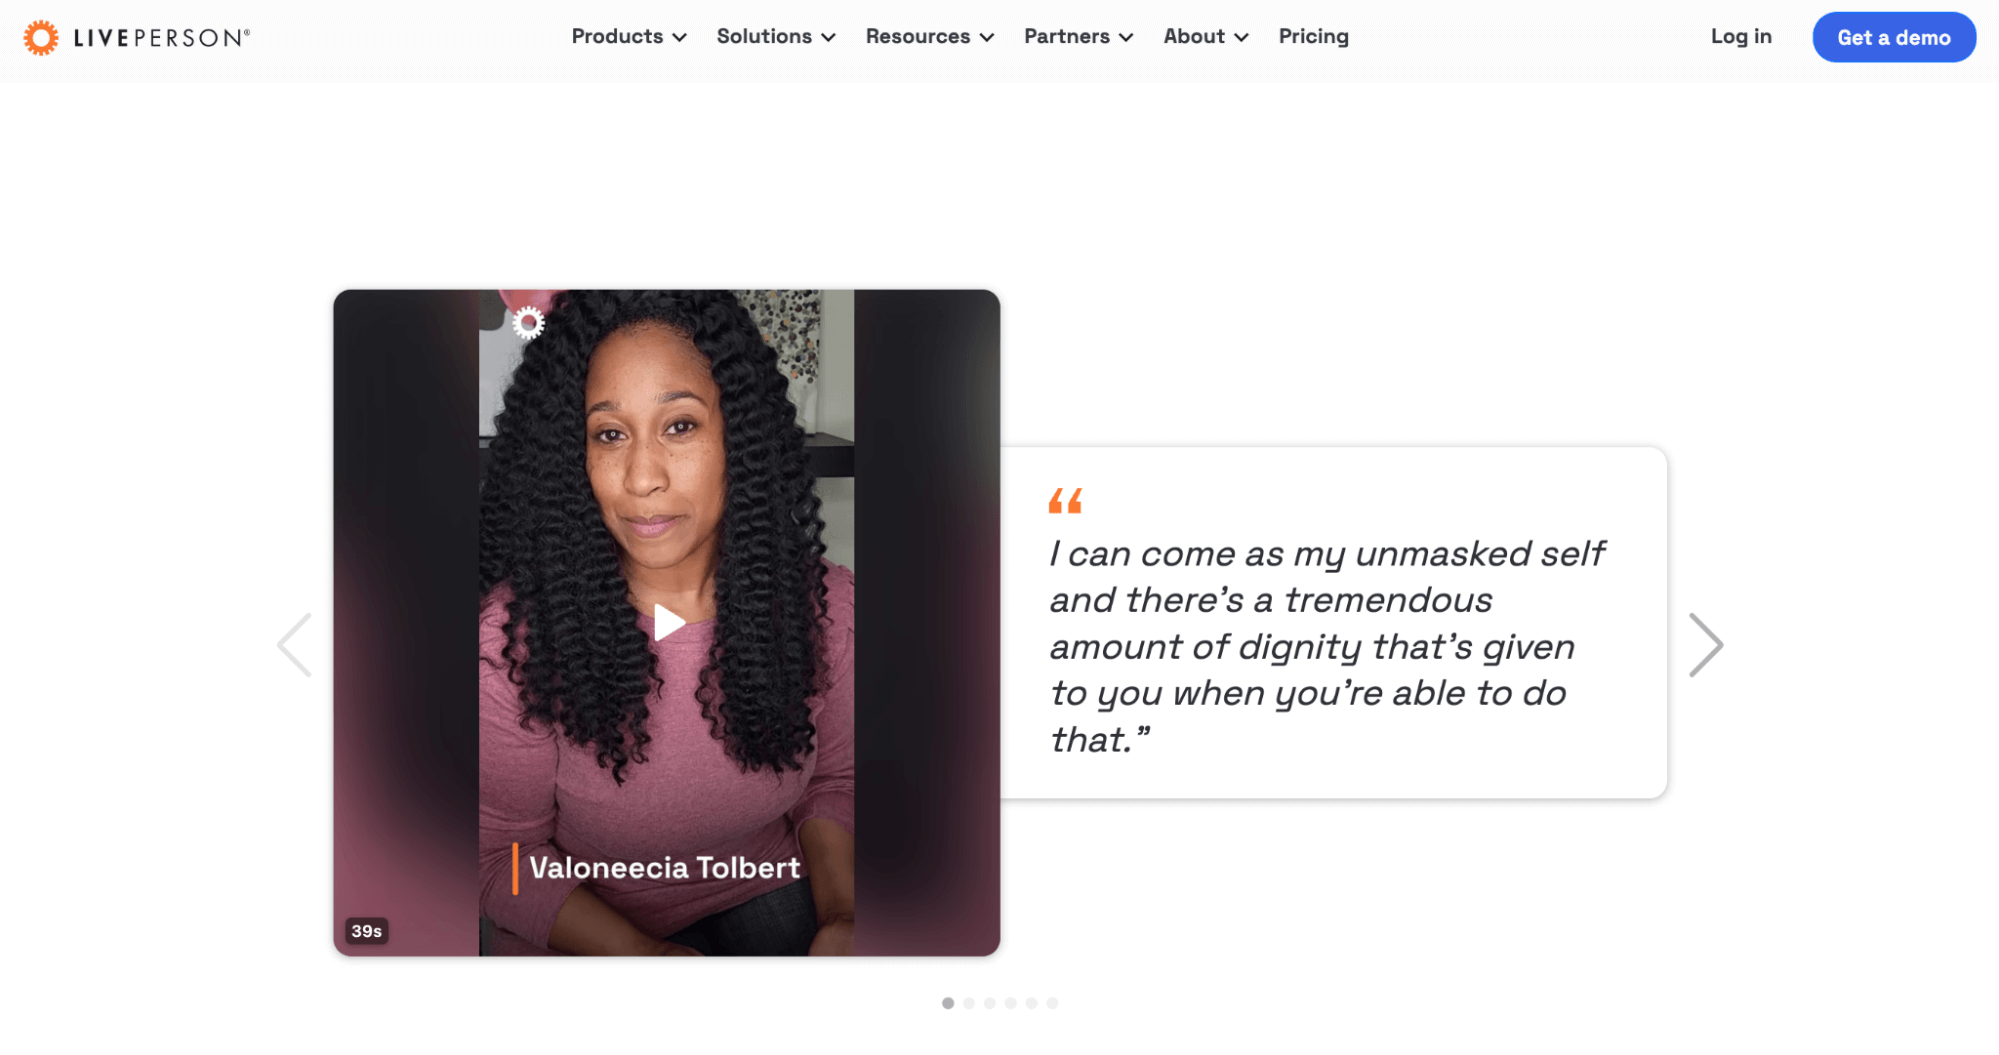 A Vocal Video testimonial on LivePerson's career page. 